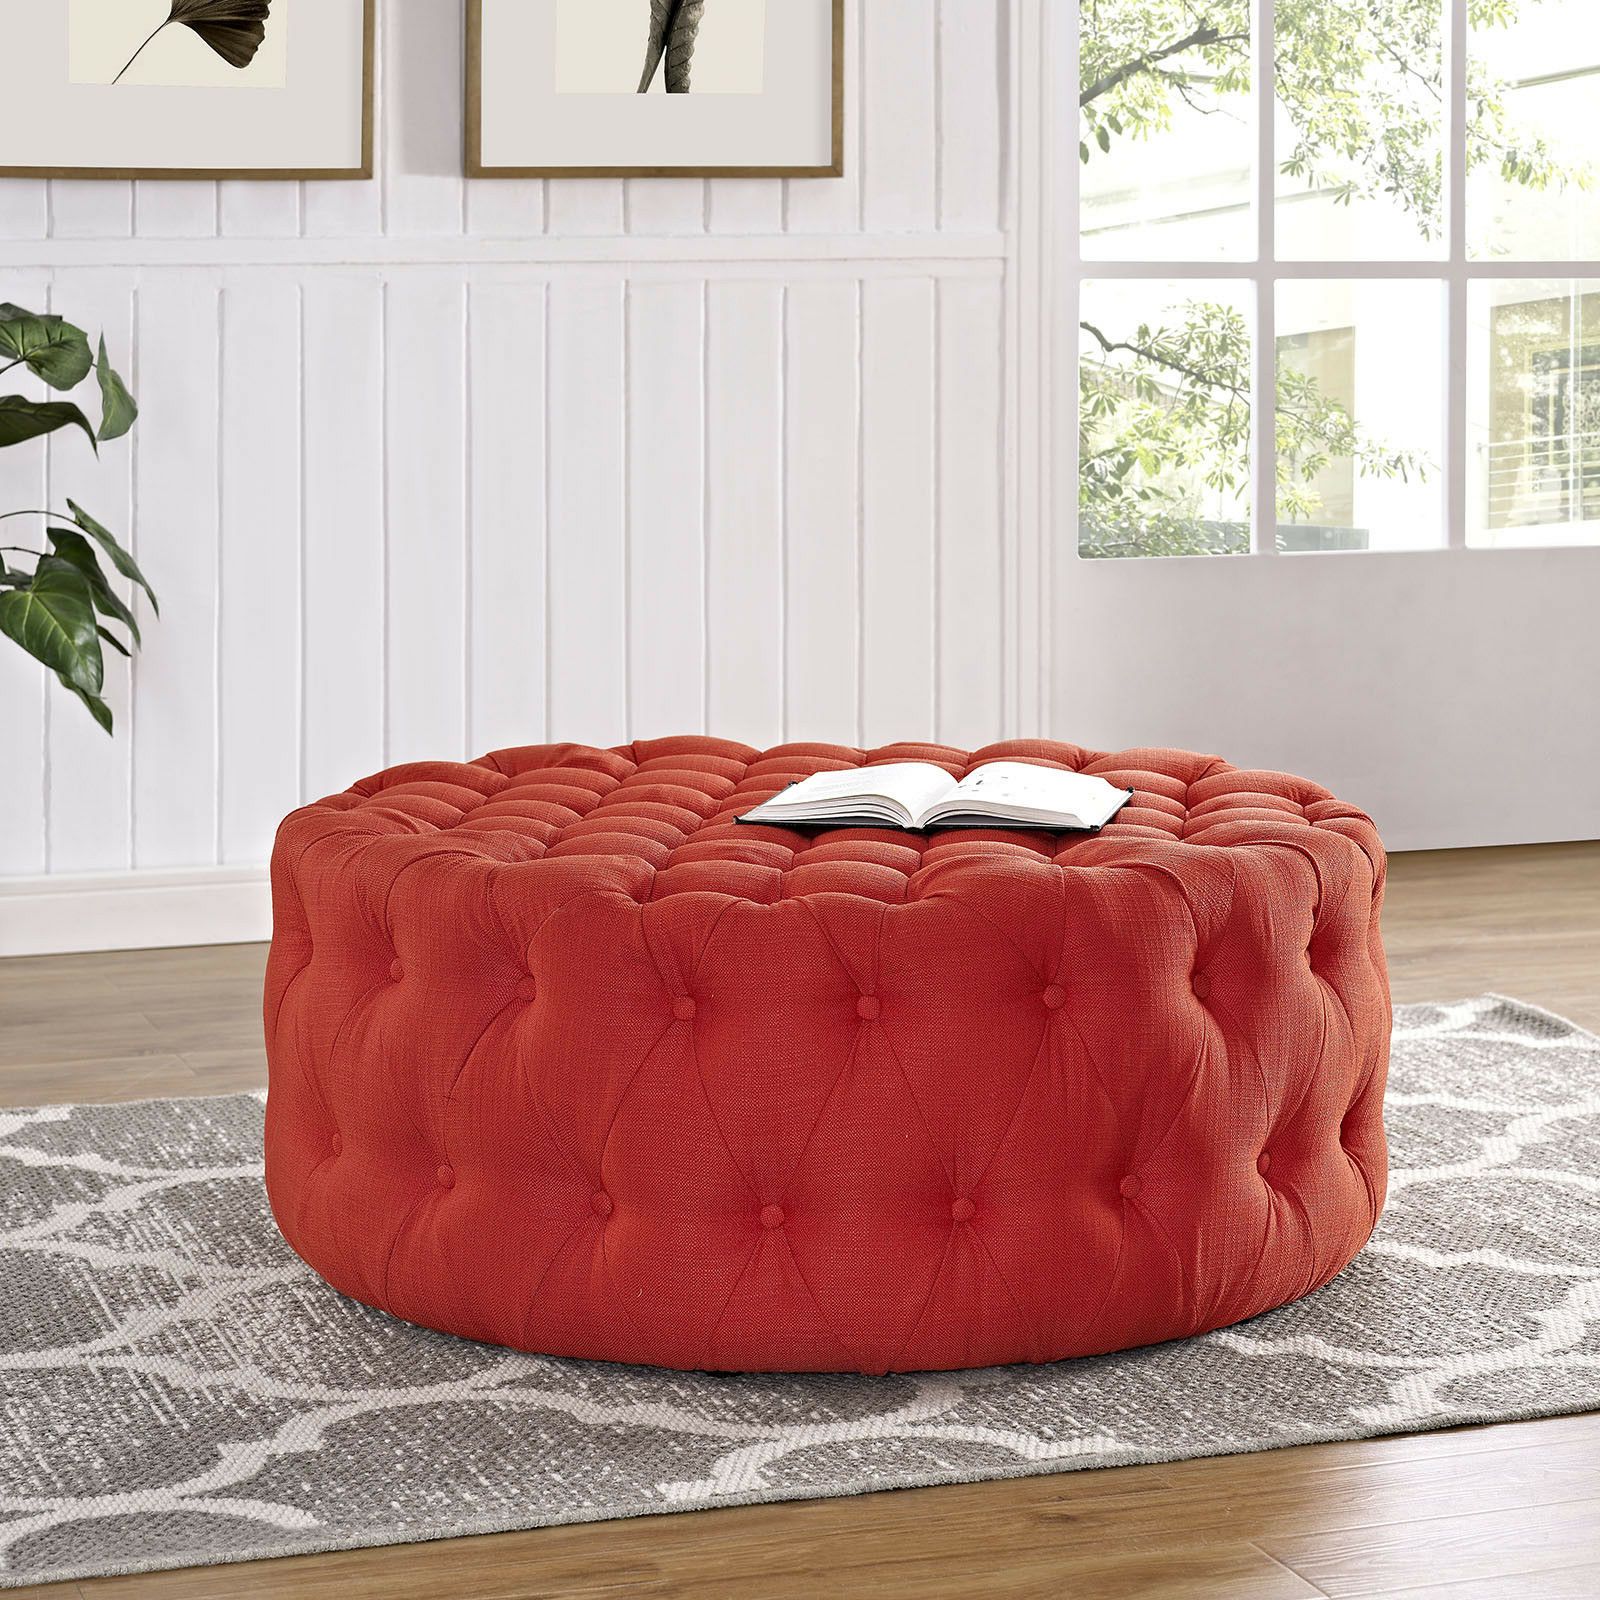 Button Tufted Fabric Upholstered Round Ottoman In Atomic Red Within Best And Newest Black Fabric Ottomans With Fringe Trim (View 3 of 10)